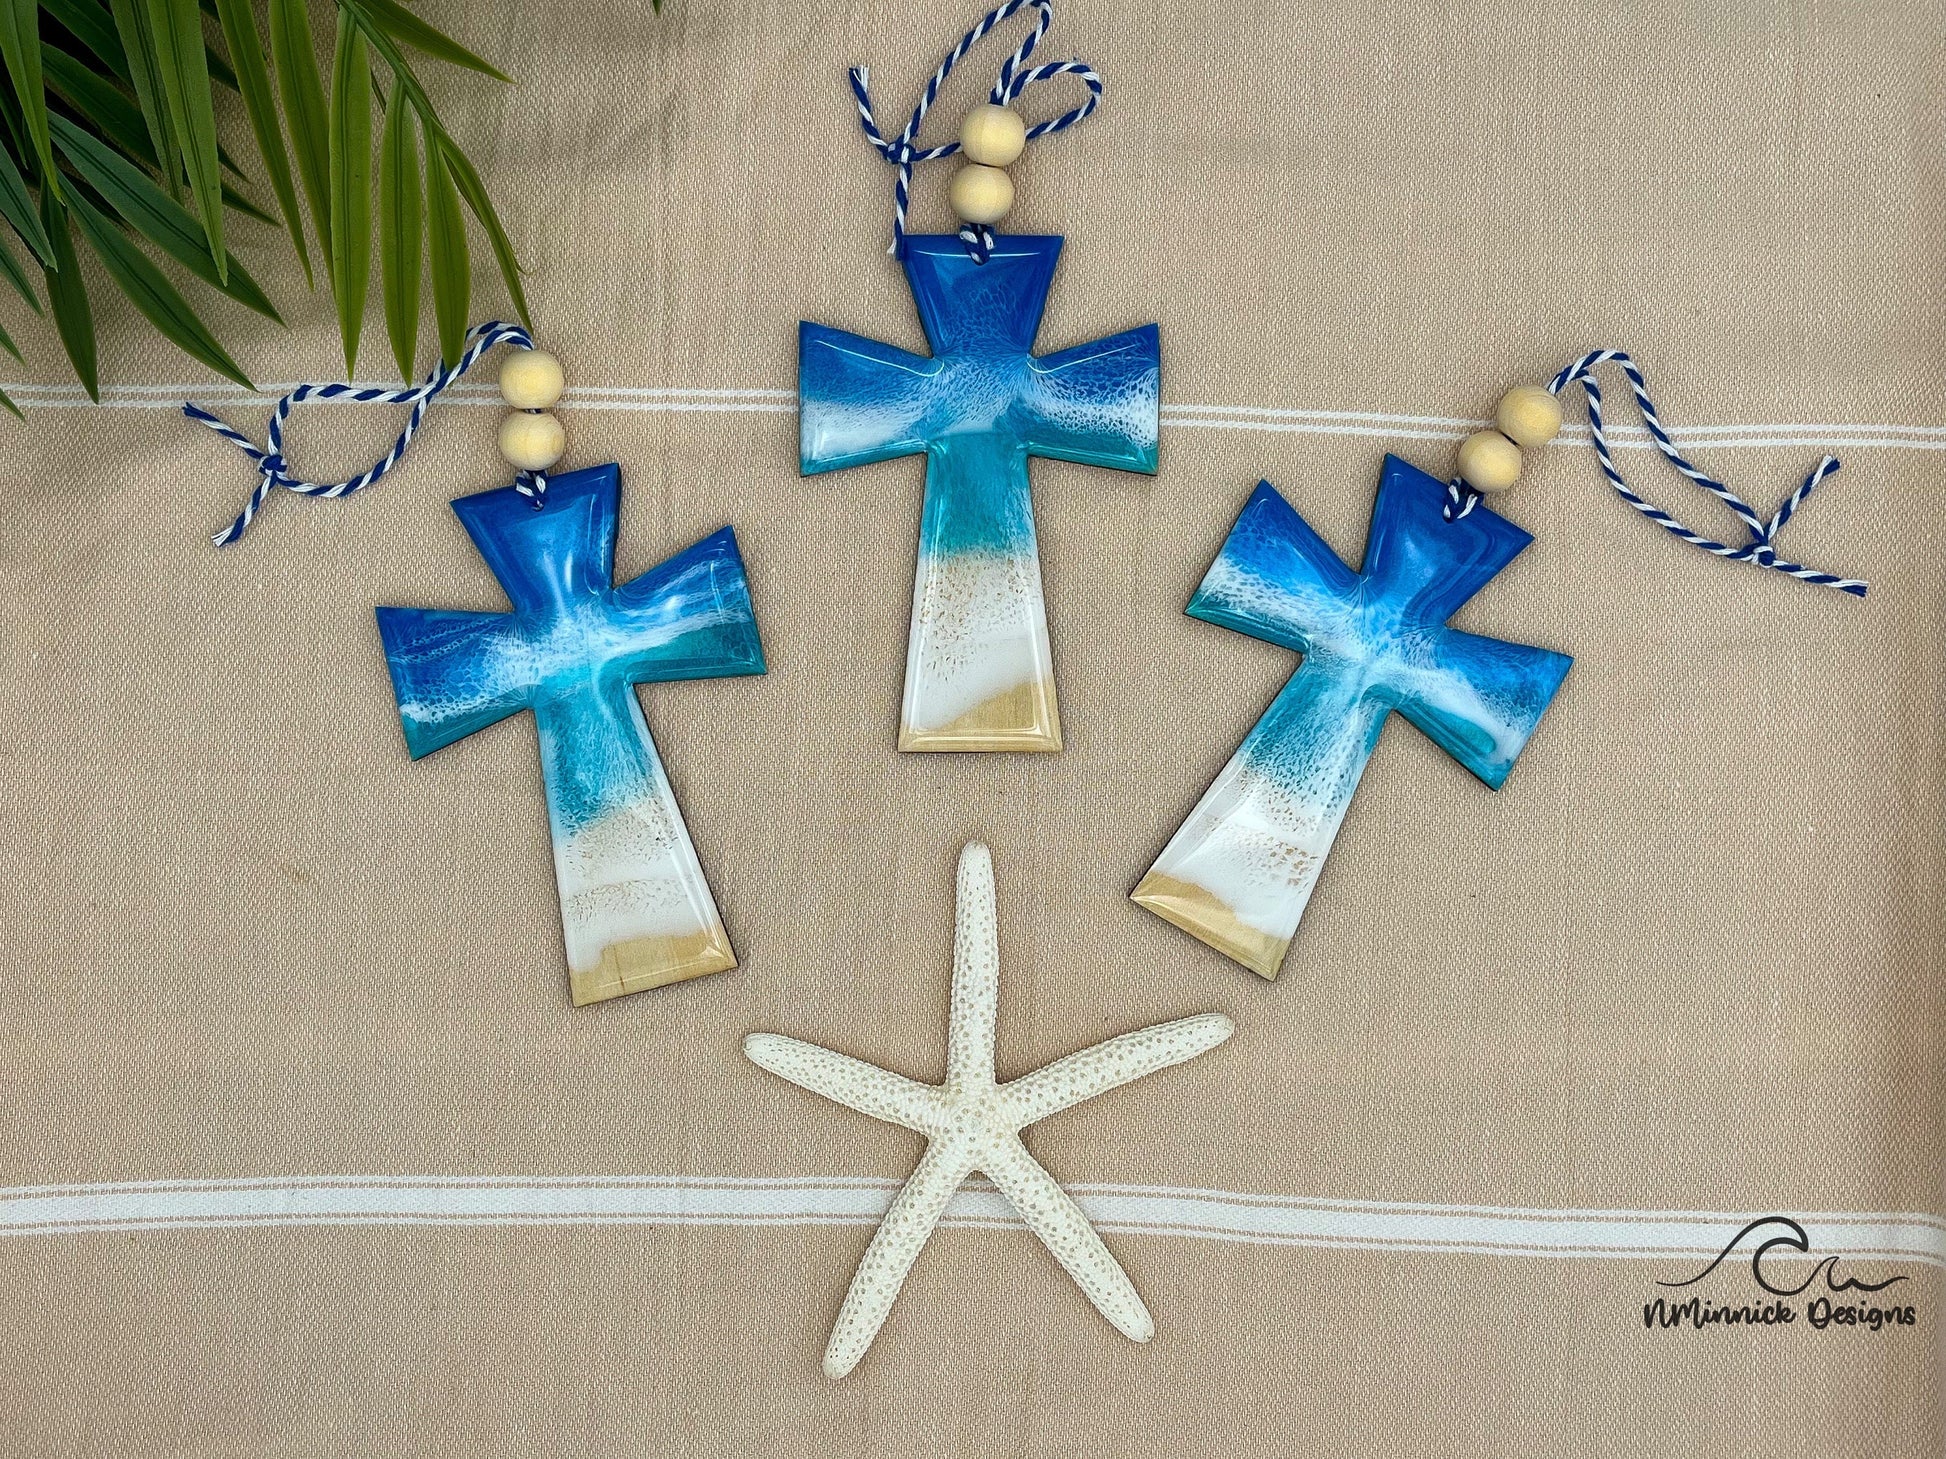 Three cross shaped wooden Christmas ornaments covered in blue ocean resin art, resembling ocean waves. Finished with baker&#39;s twine and two wooden beads. Laying on a tan beach towel next to a natural starfish and palm leaves.